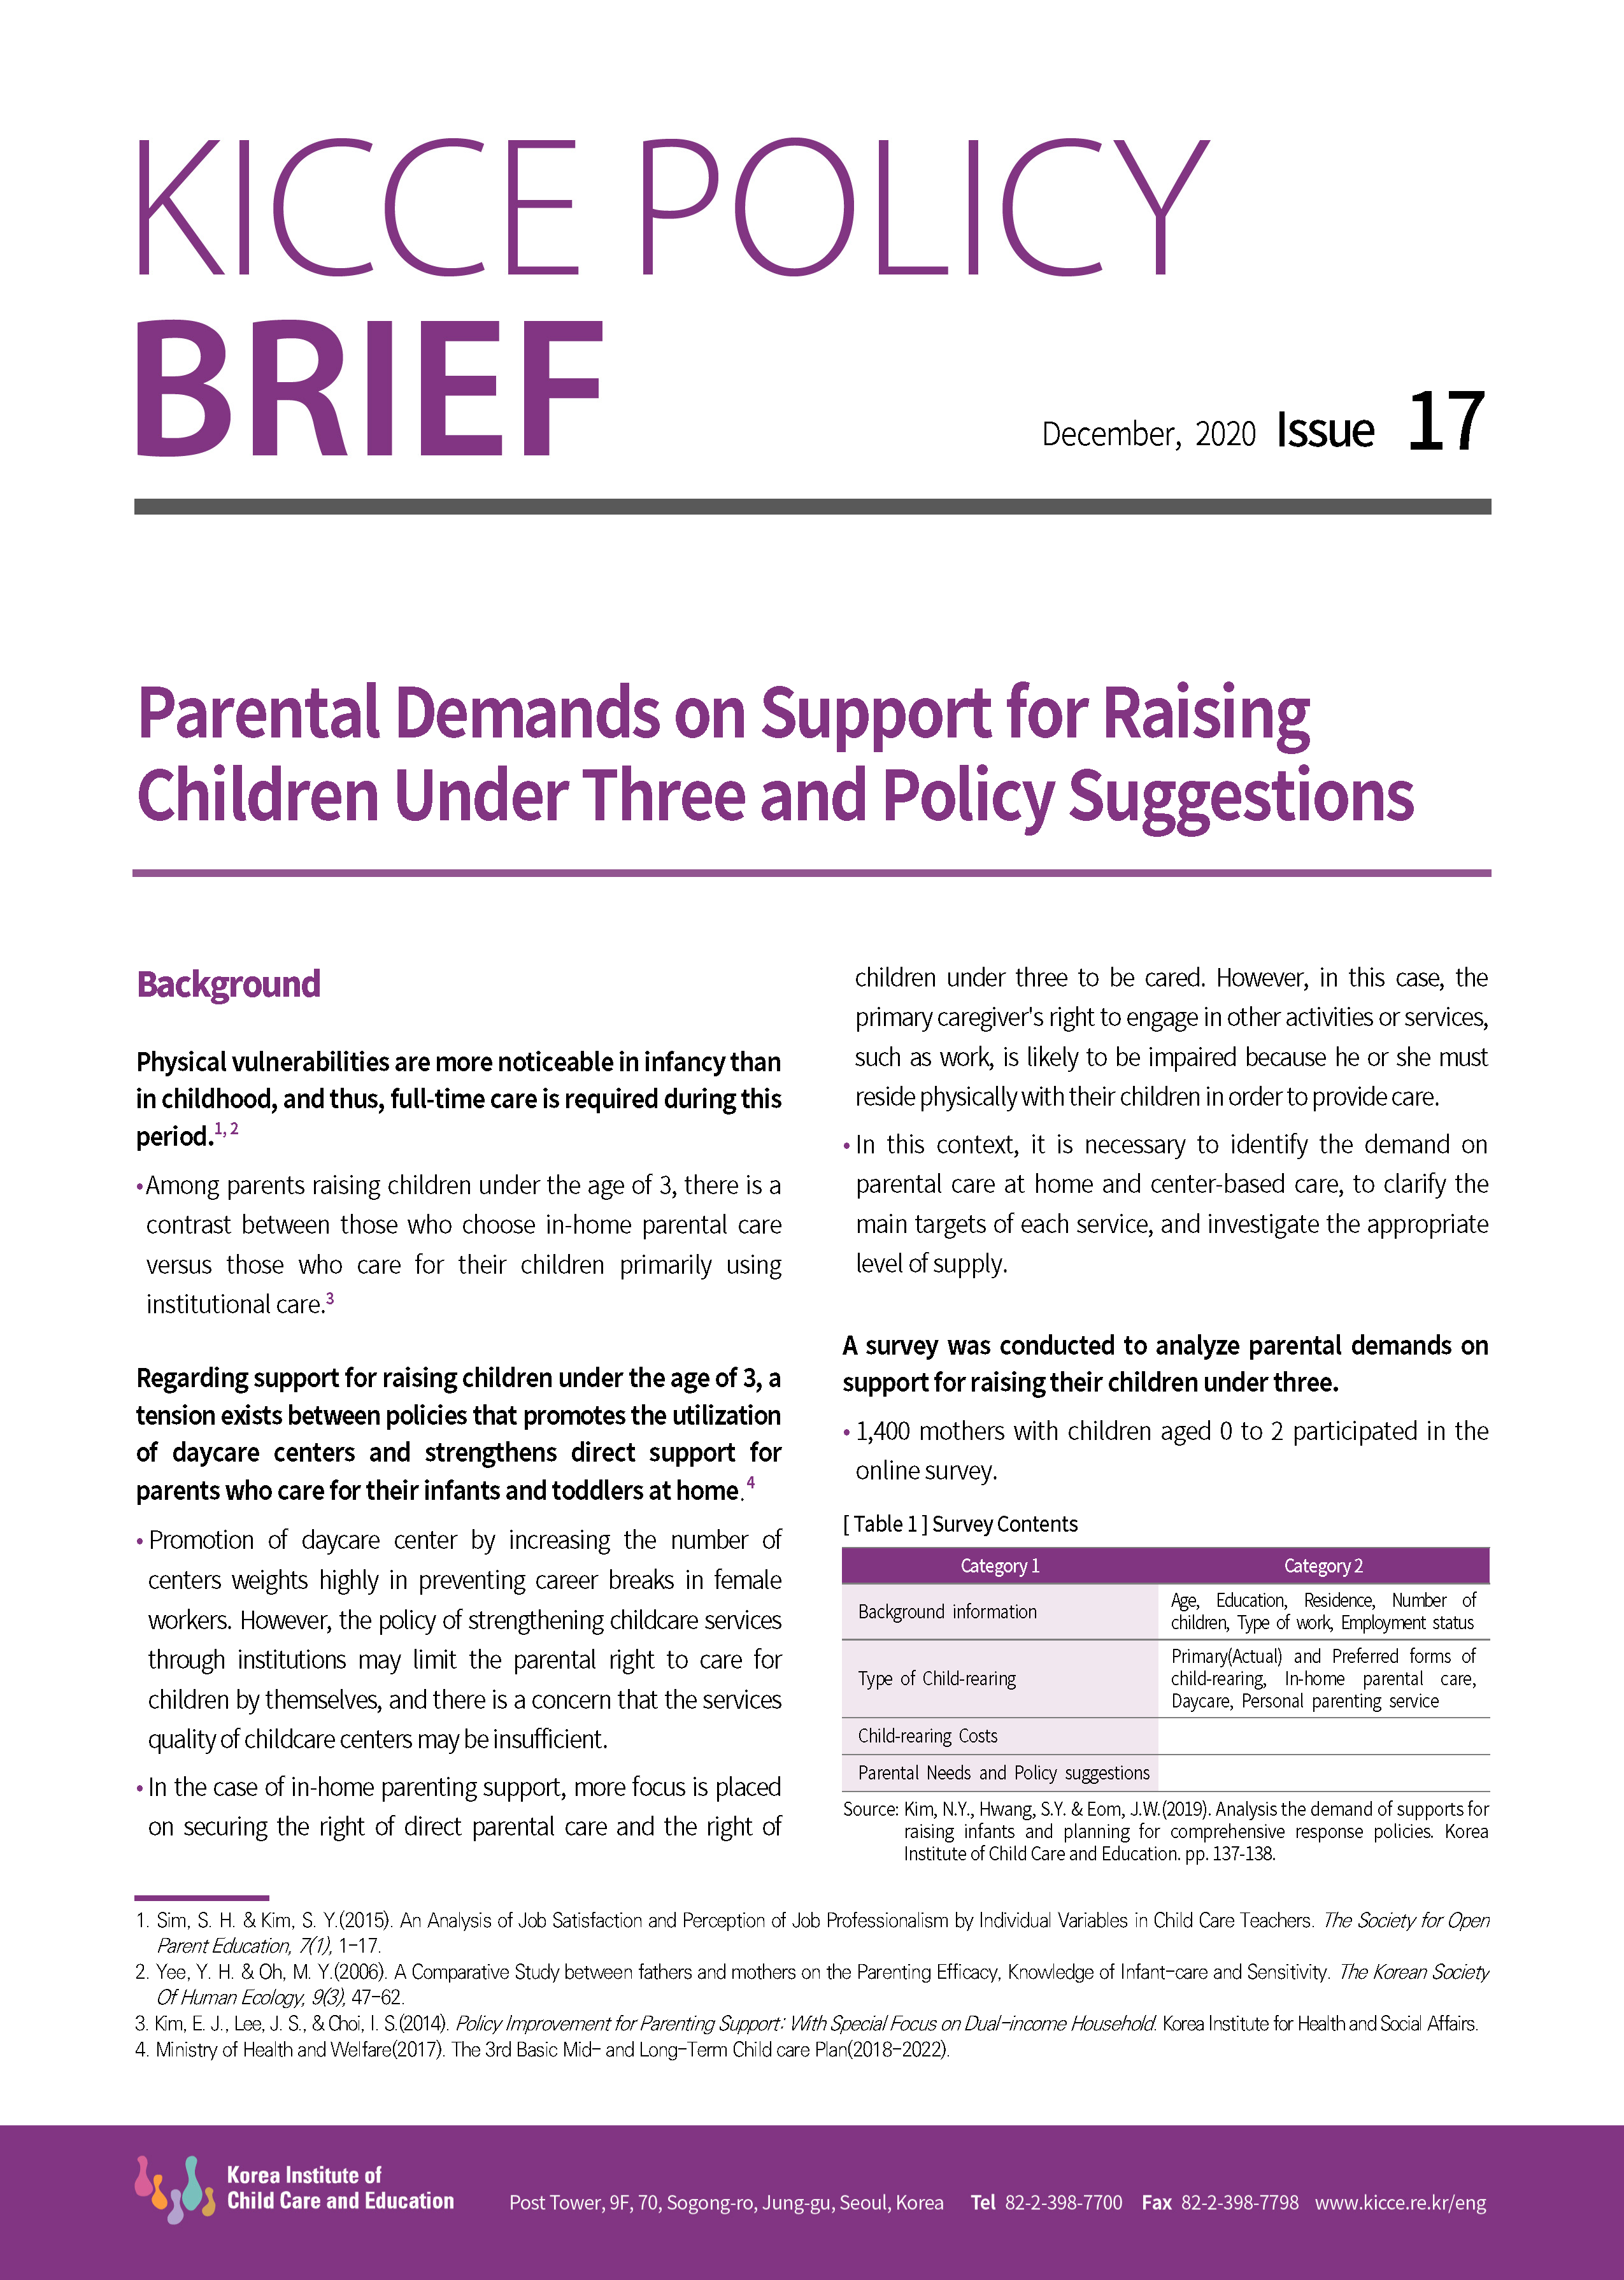 [Issue 17] Parental Demands on Support for Raising Children Under Three and Policy Suggestions 관련 이미지 입니다.